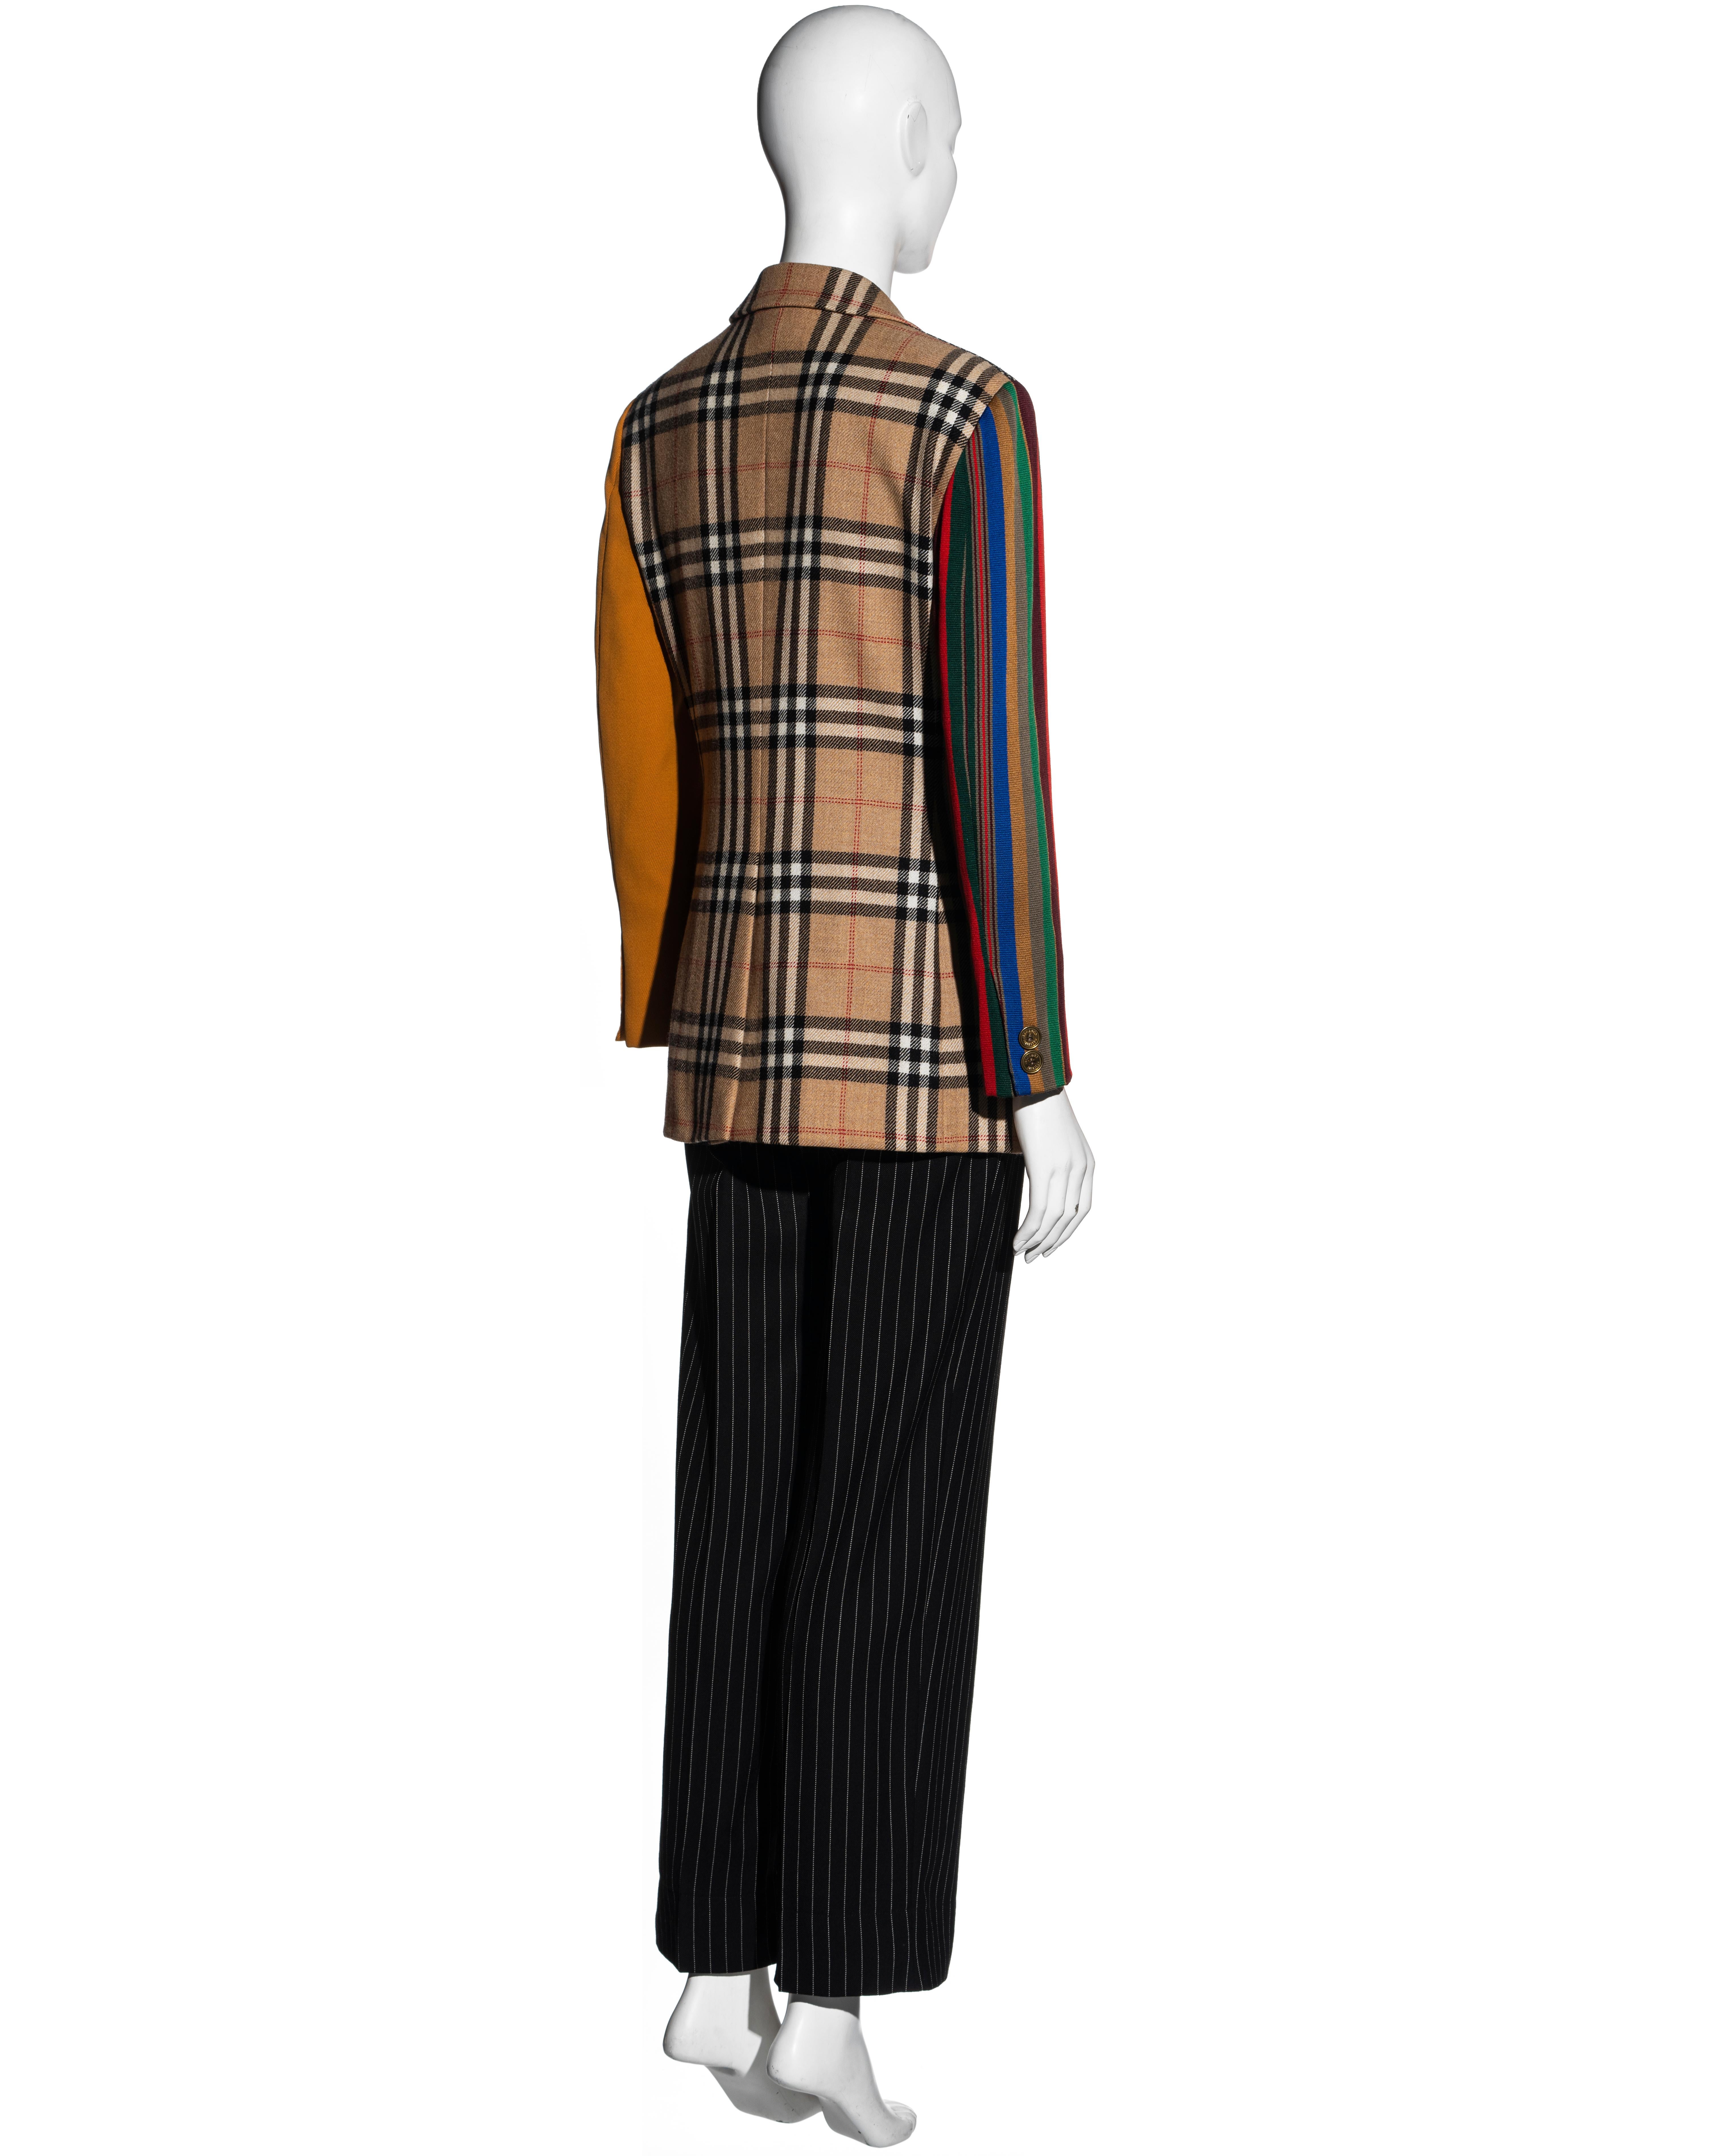 Moschino Couture patchwork wool blazer jacket and pants suit, ss 1994 For Sale 4